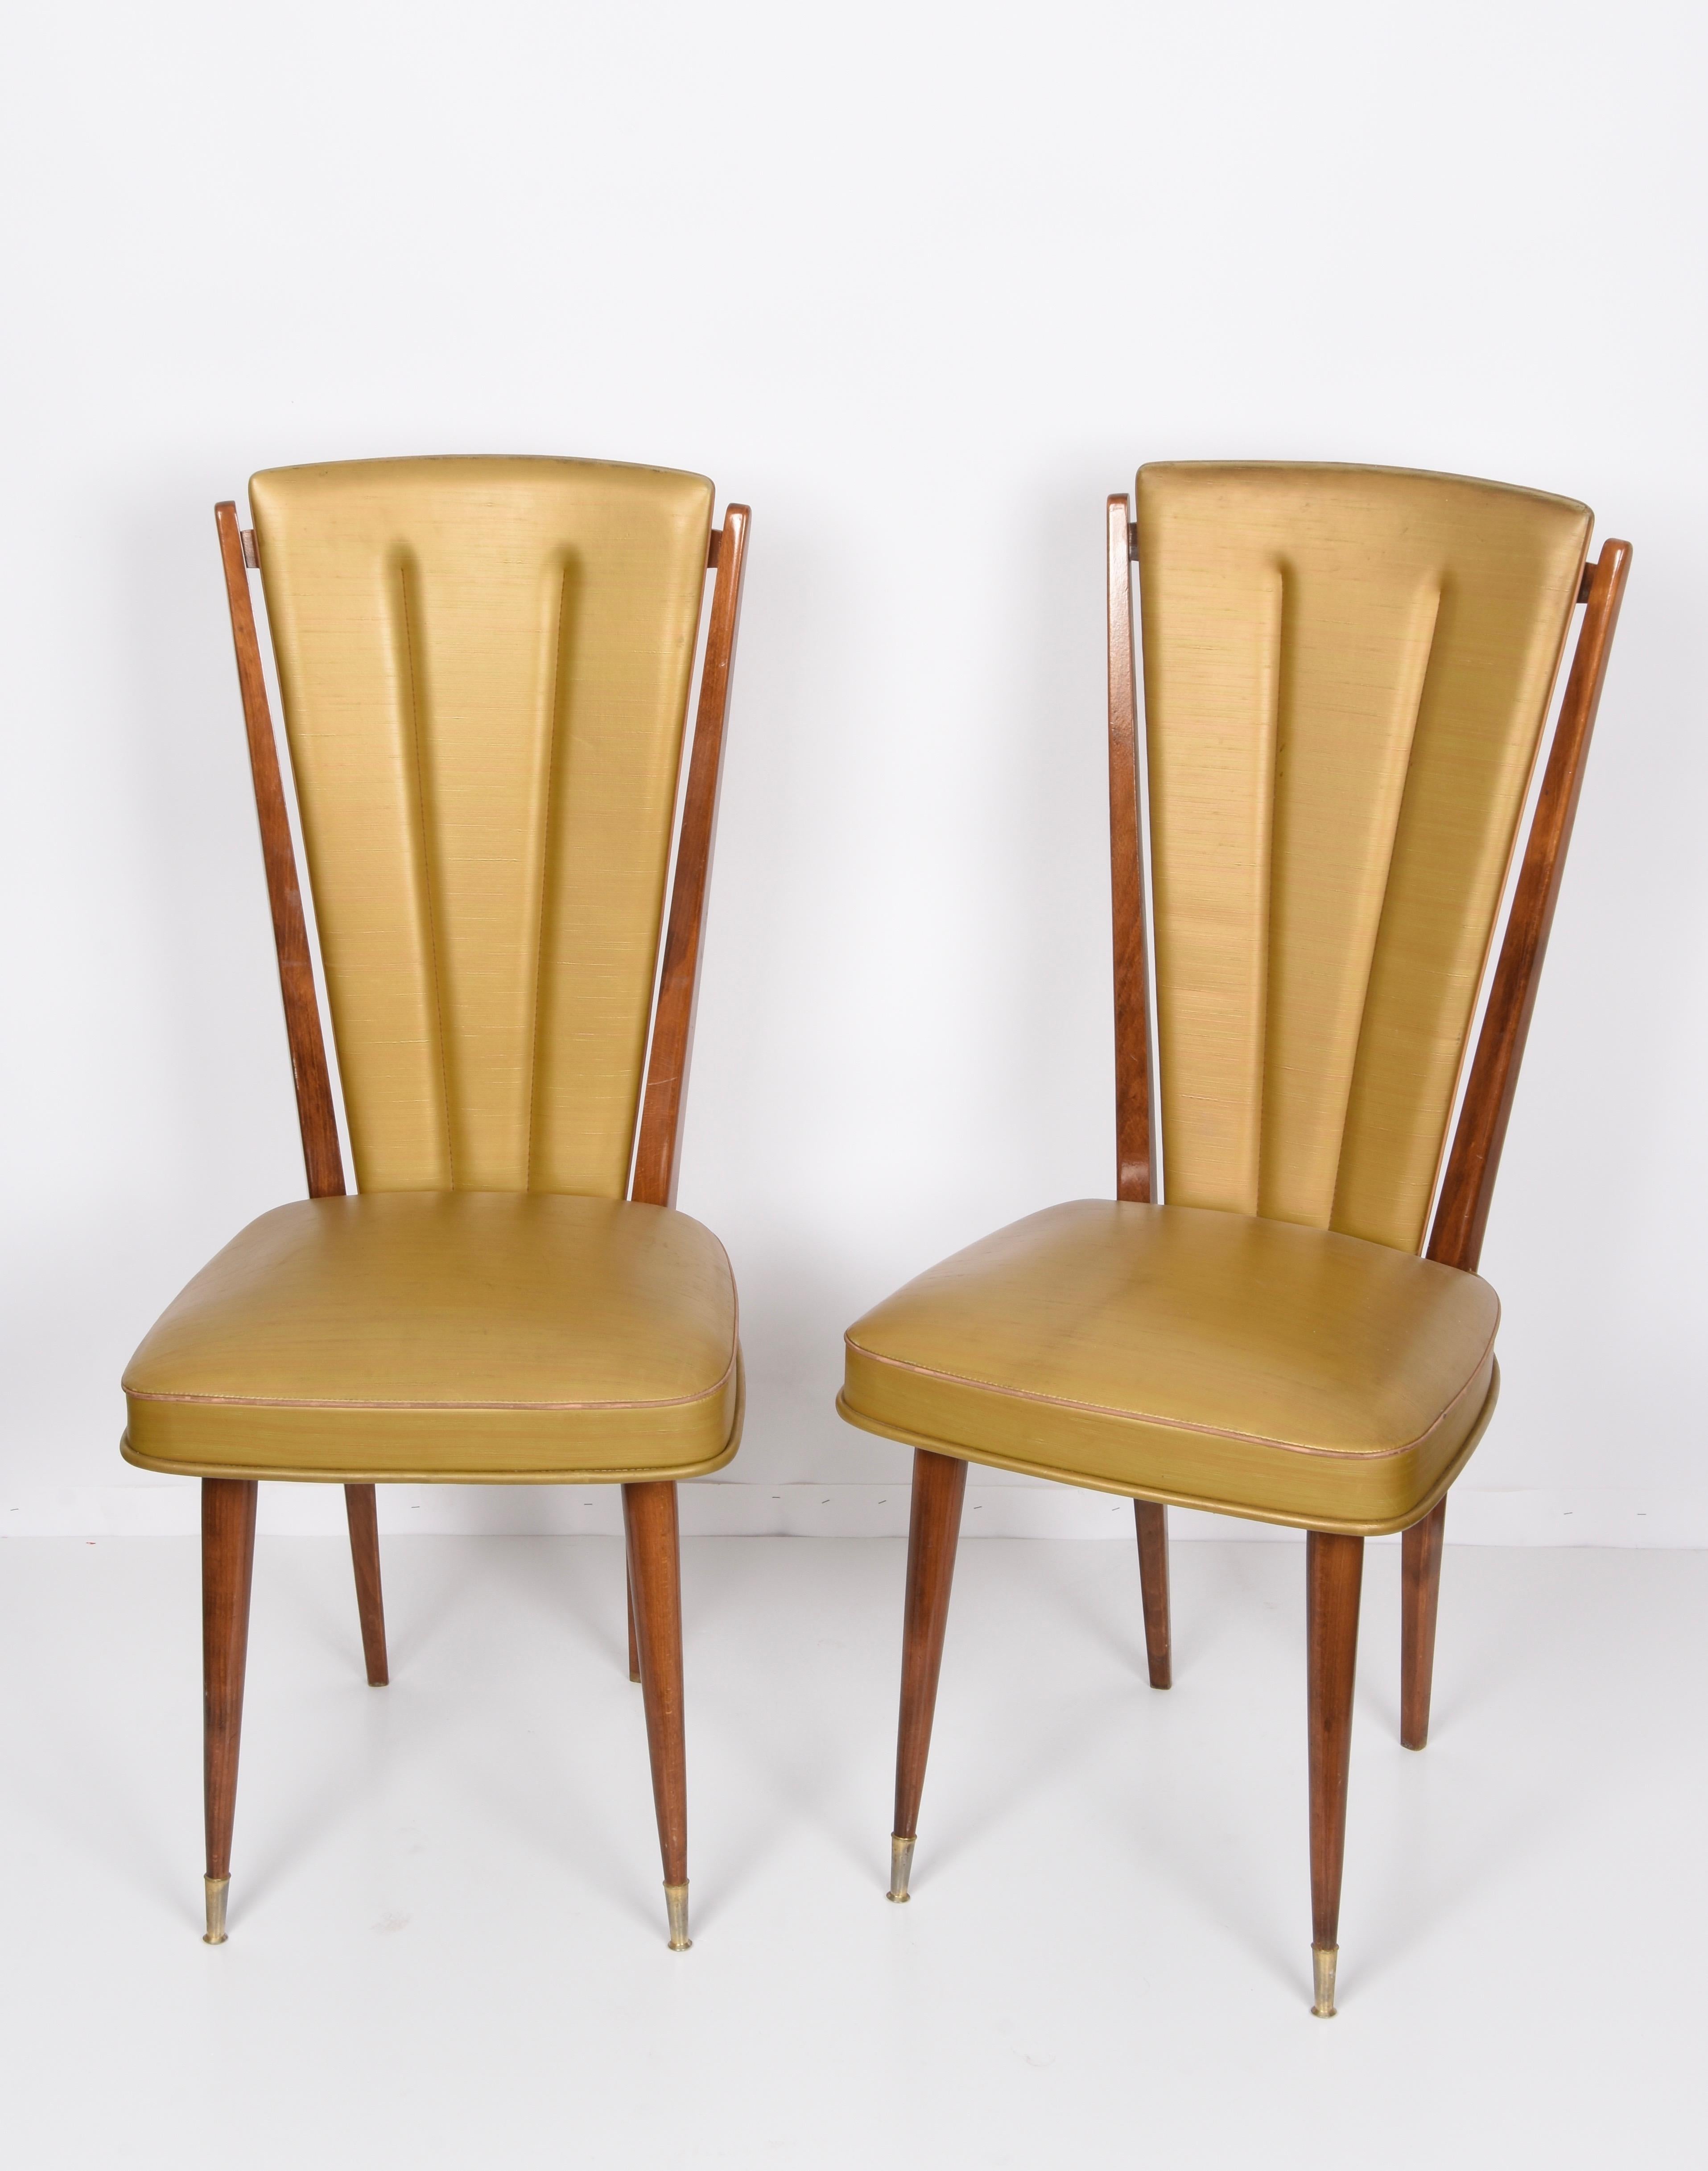 French Pair of Ameublement NF Beech and Beige Vinyl Upholstered Dining Chairs, 1950s For Sale